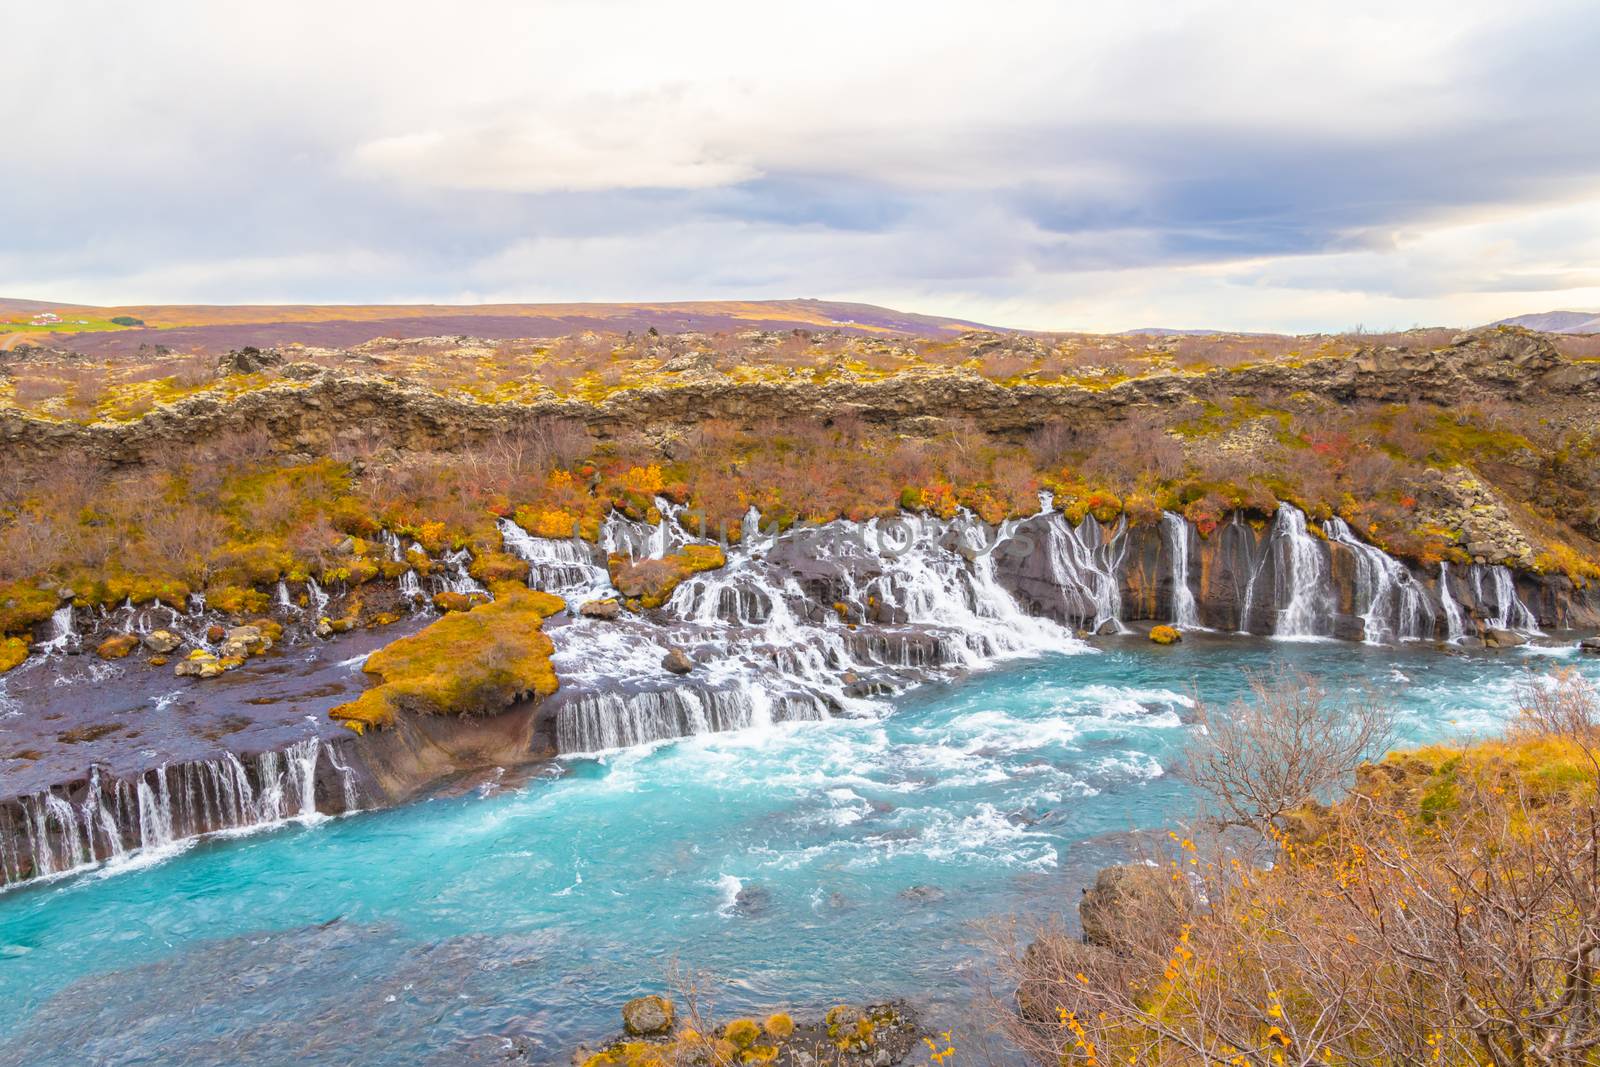 Hraunfossar series of waterfalls barnafoss turquoise water collecting into plunge pool during autumn by MXW_Stock